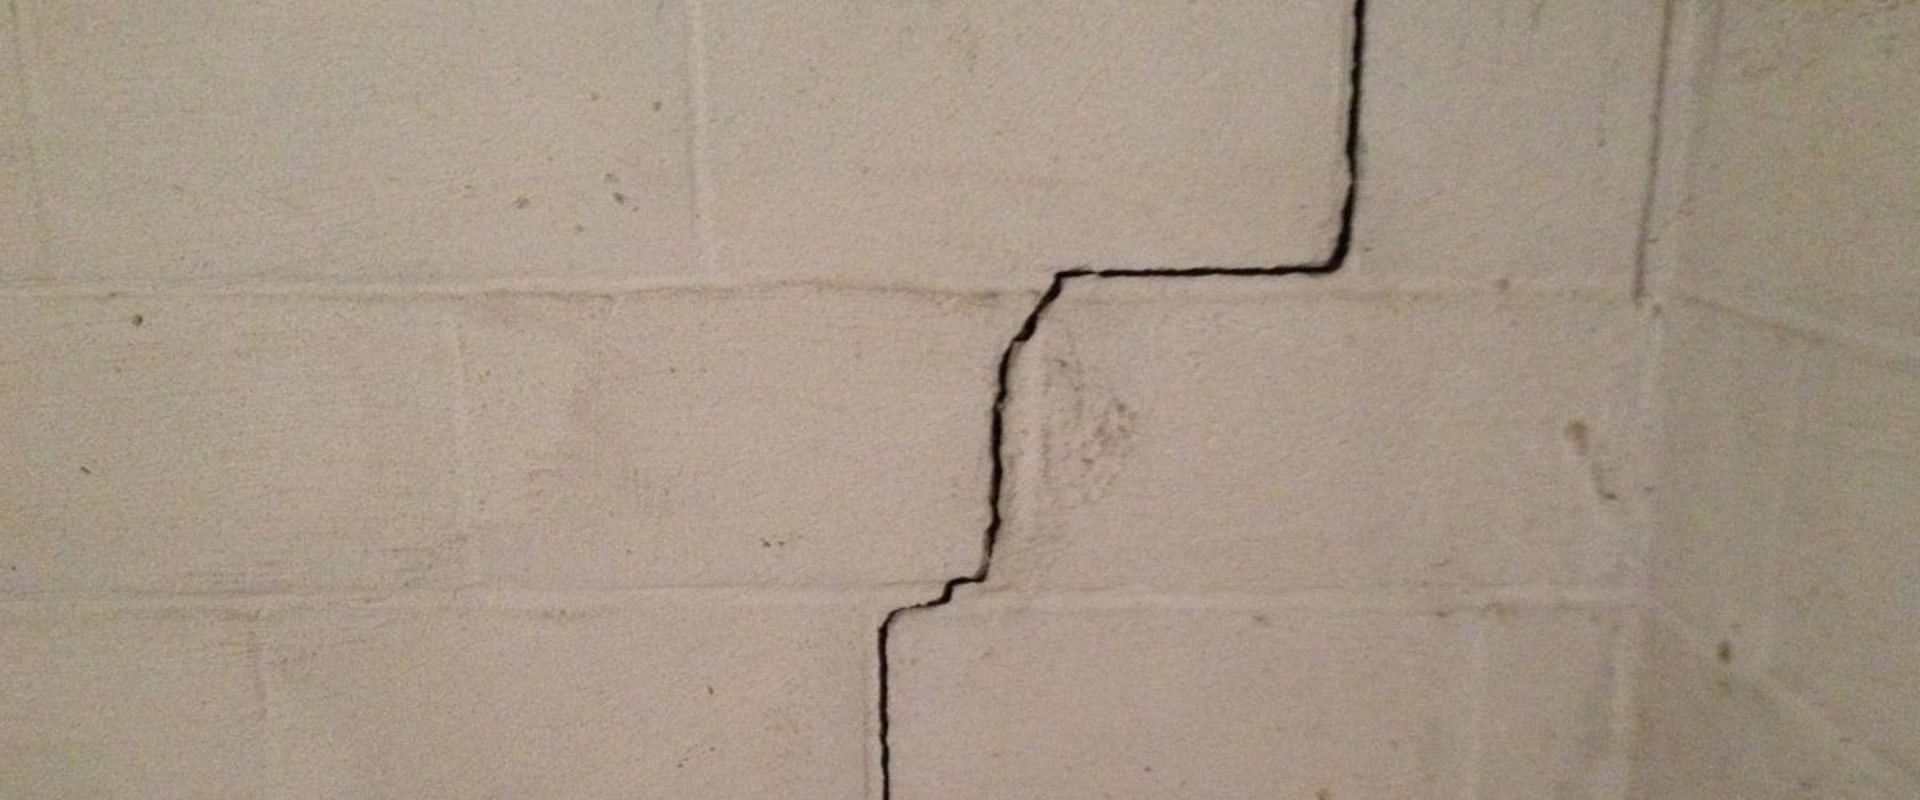 Can the wall of concrete blocks be repaired?